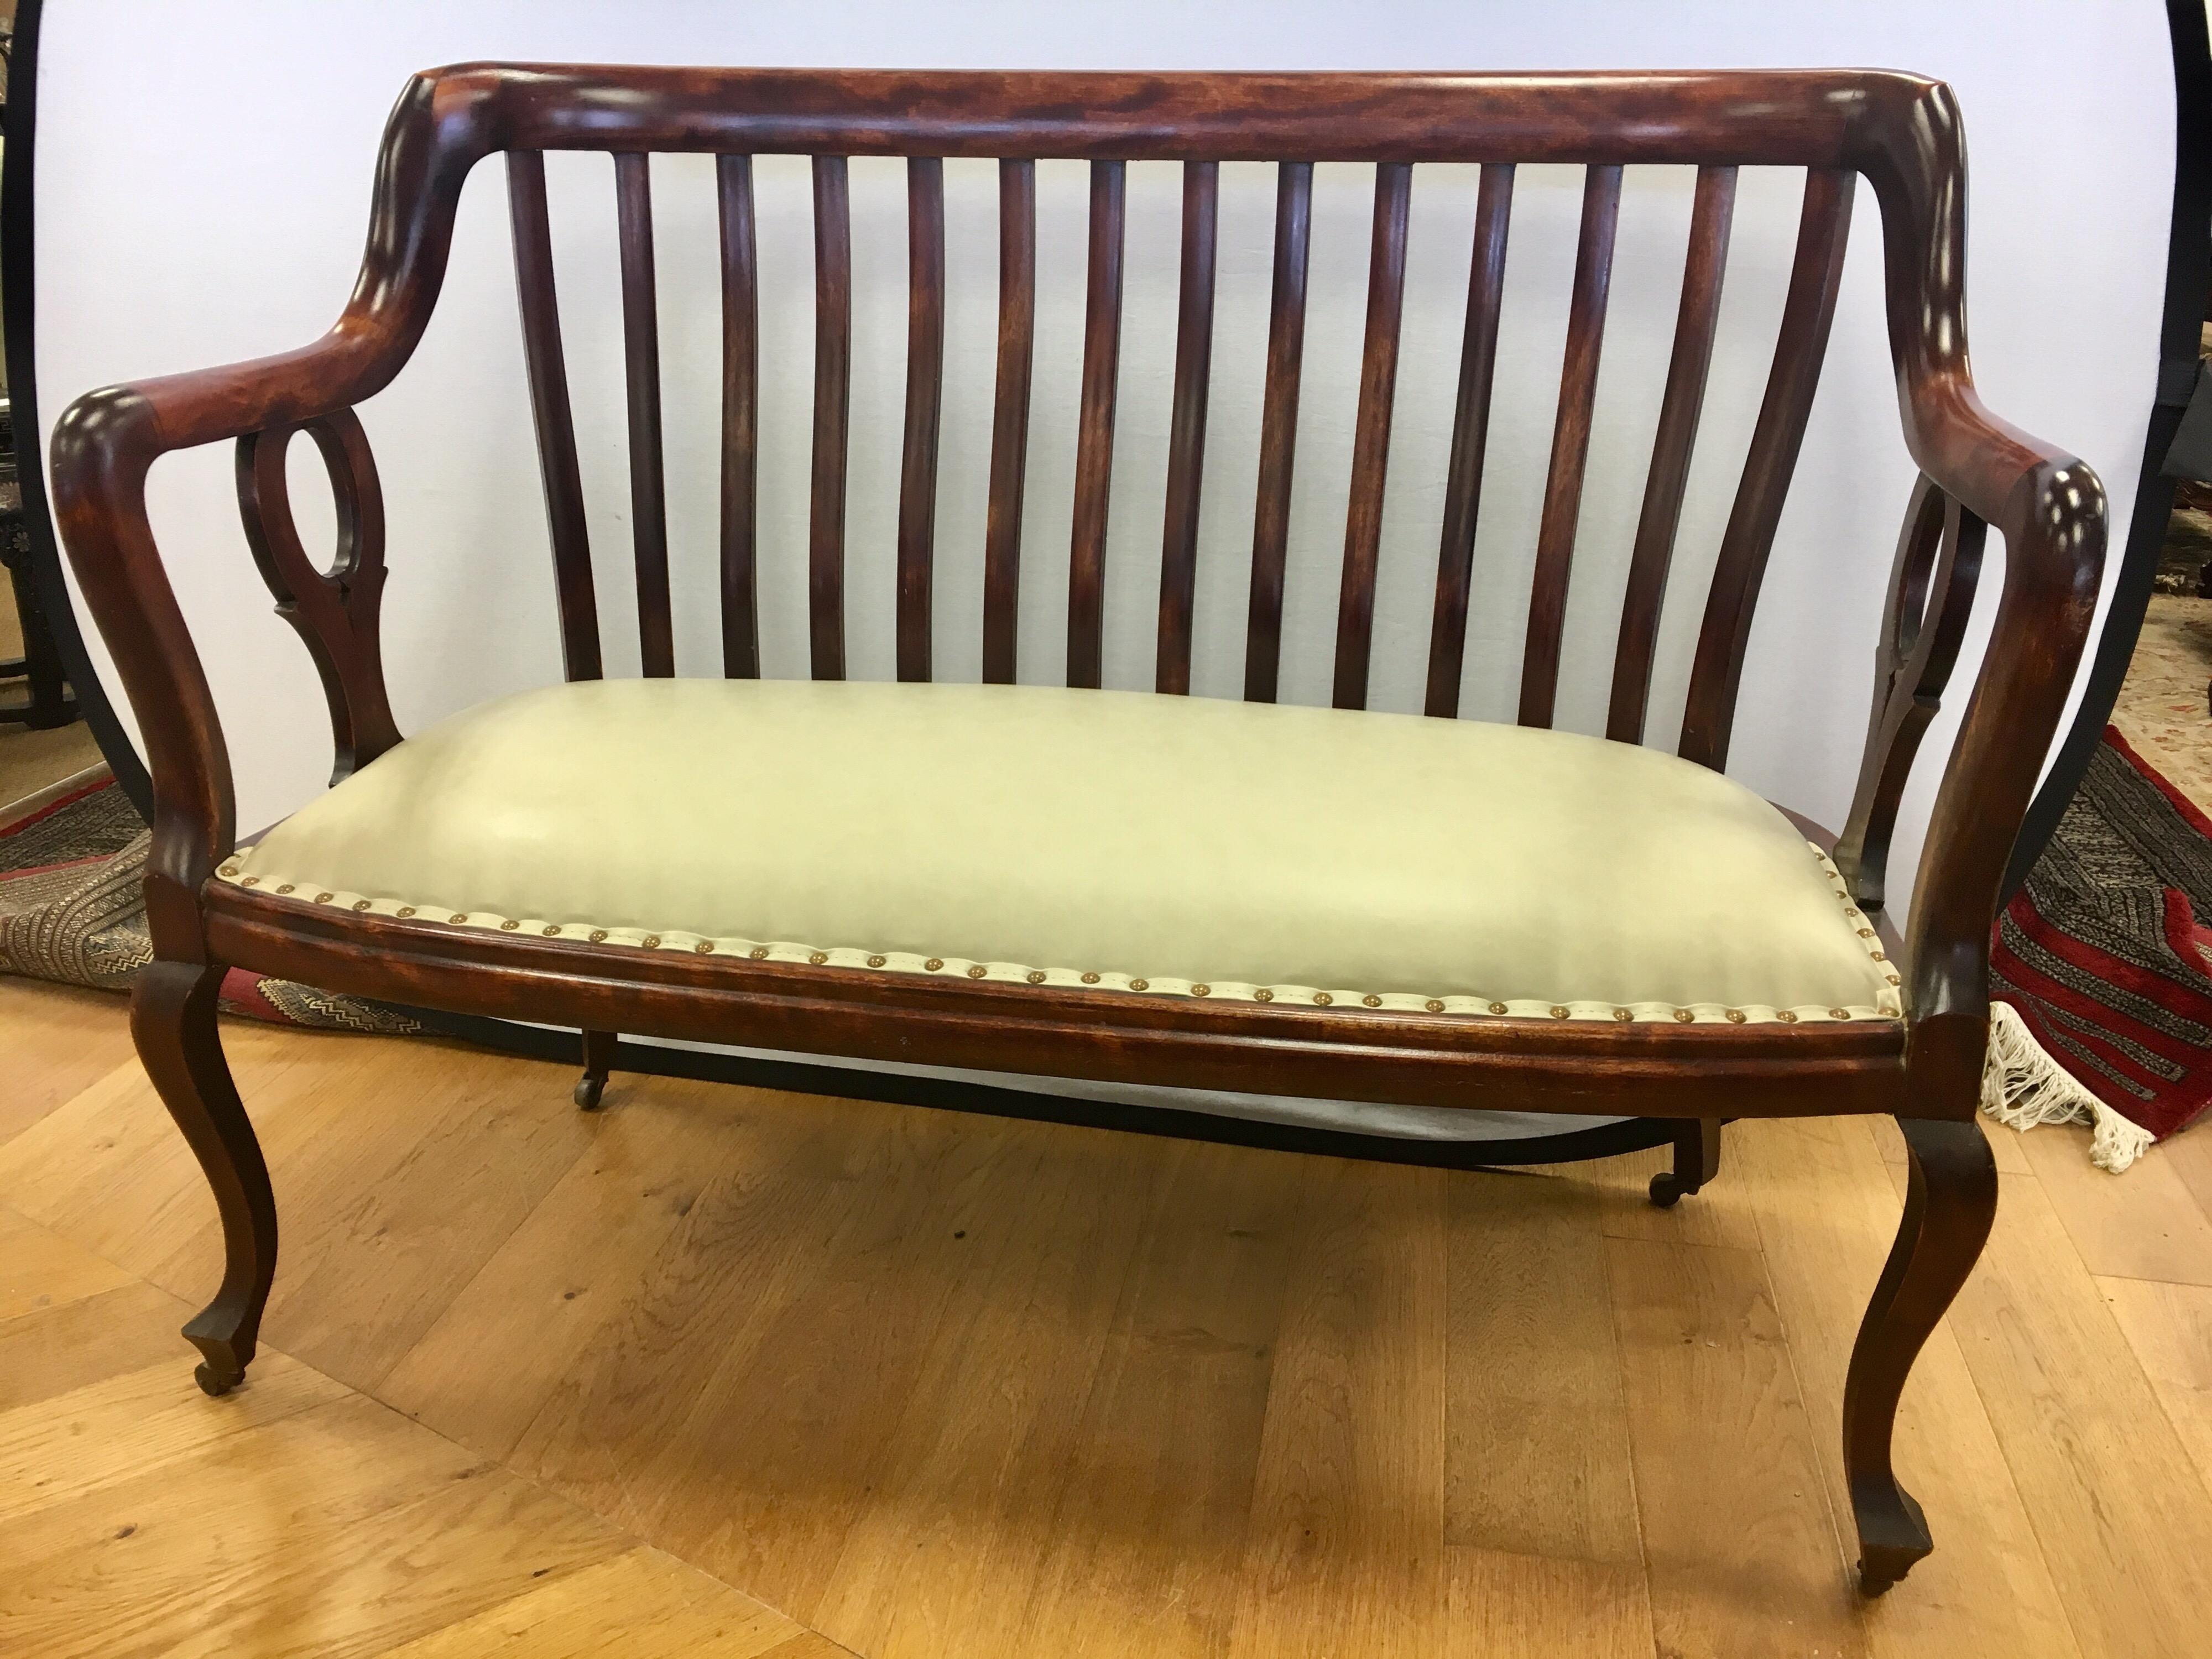 Georgian English Mahogany Settee Bench Fully Restored with New Upholstery Made in England